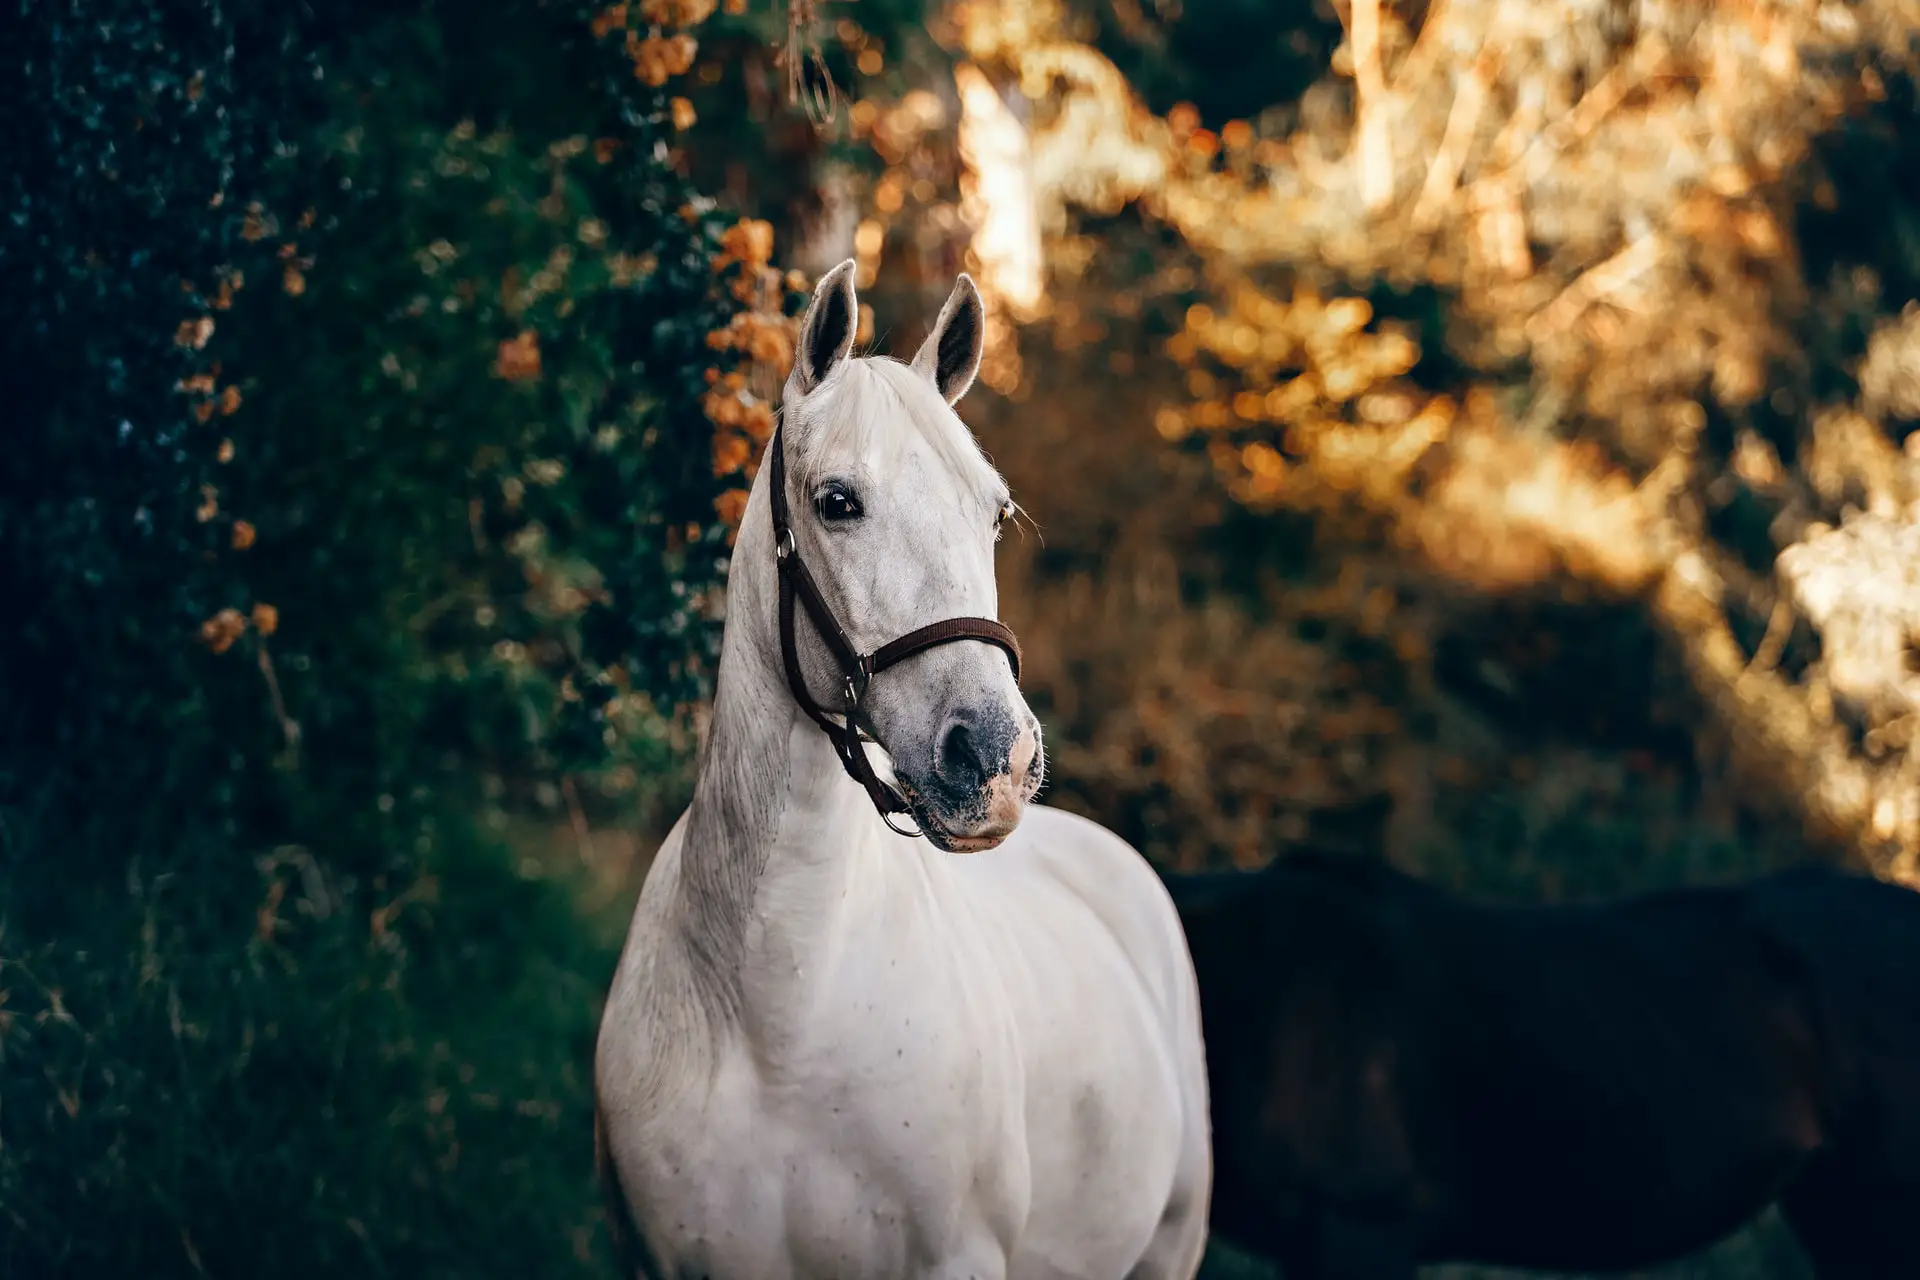 Dreaming Of A White Horse: Other Meanings